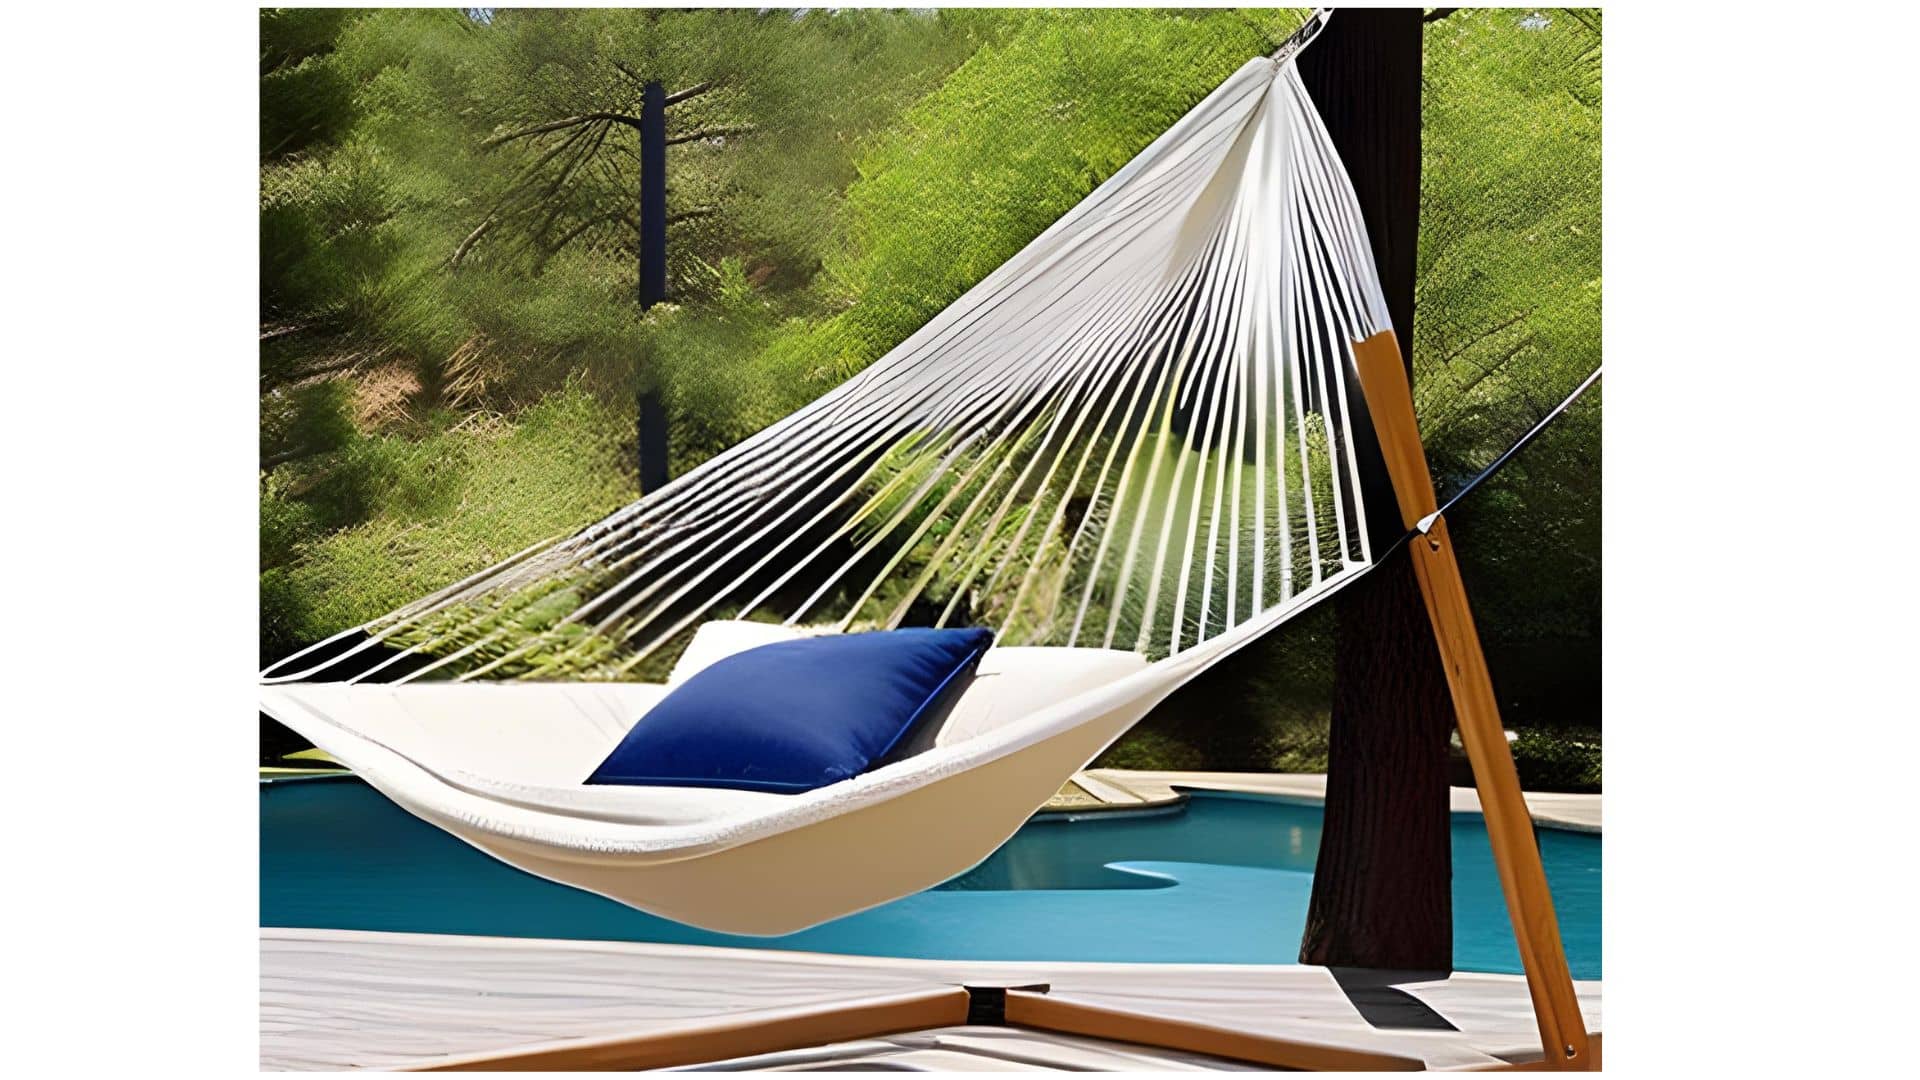 How to Hang a Hammock Chair